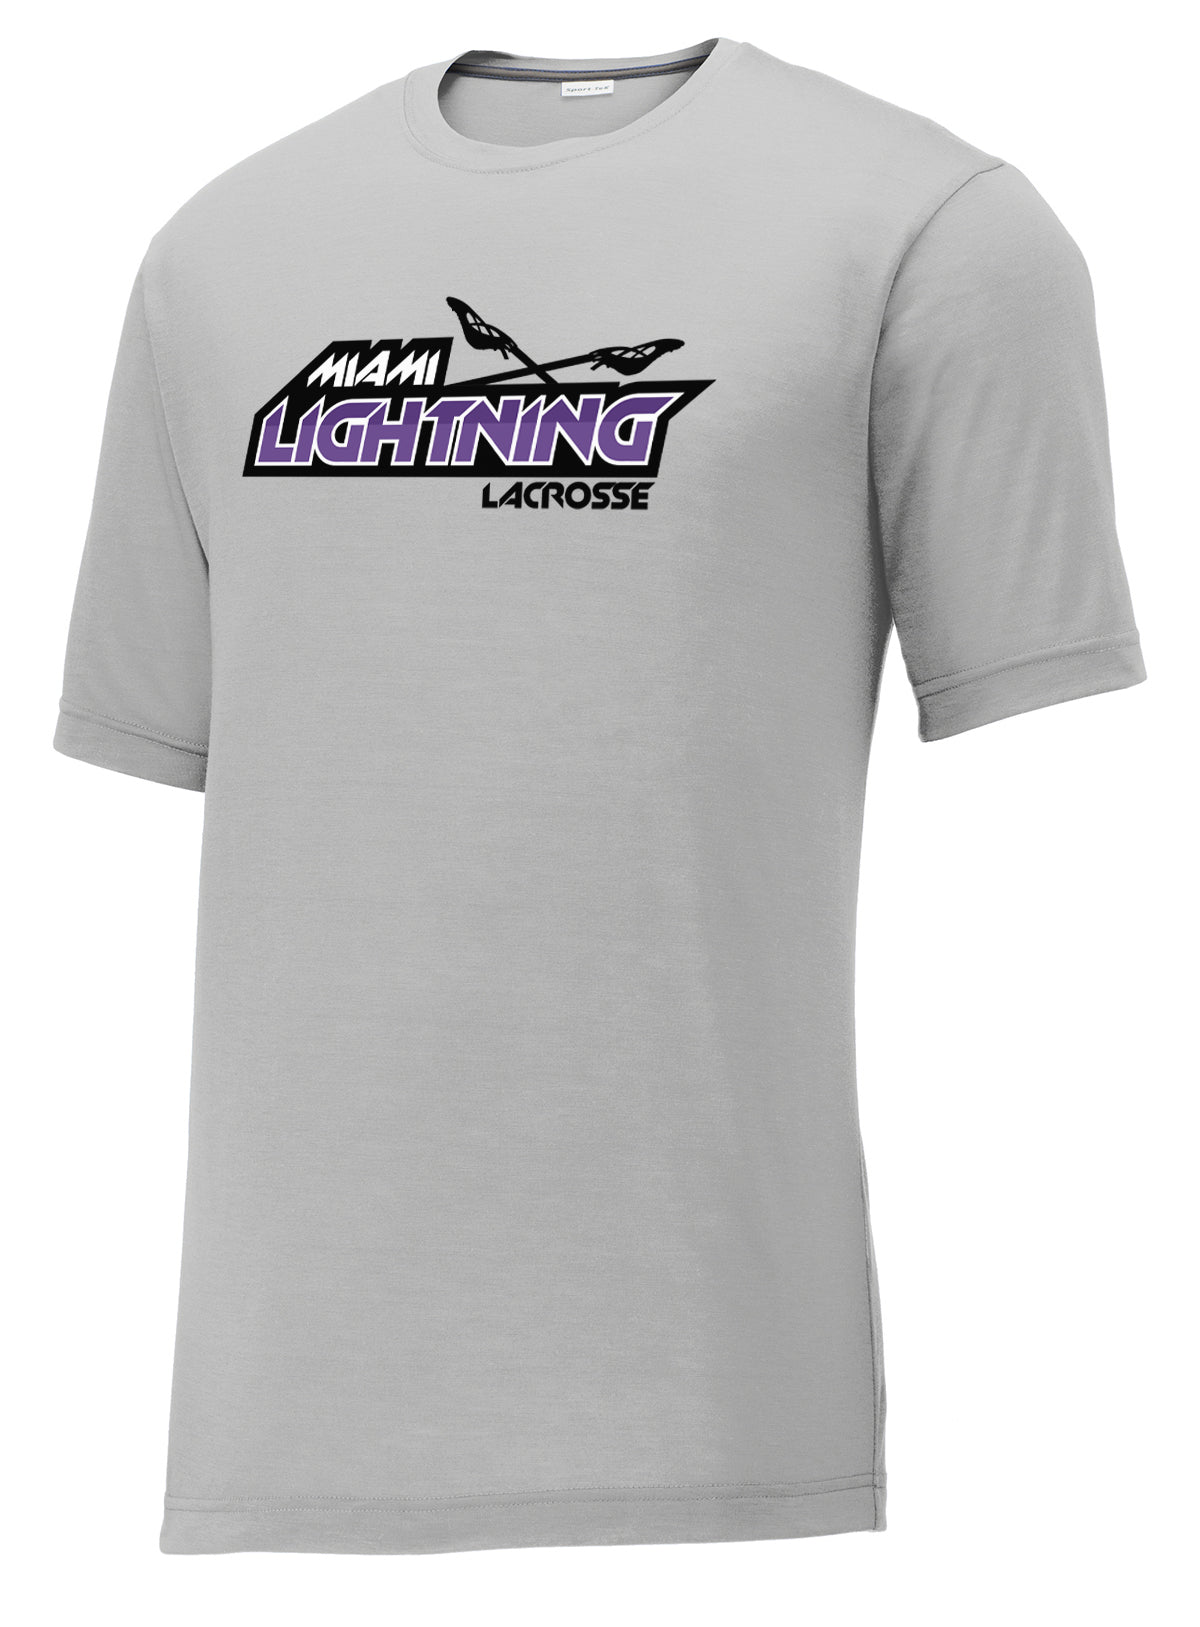 Miami Lightning Silver CottonTouch Performance T-Shirt